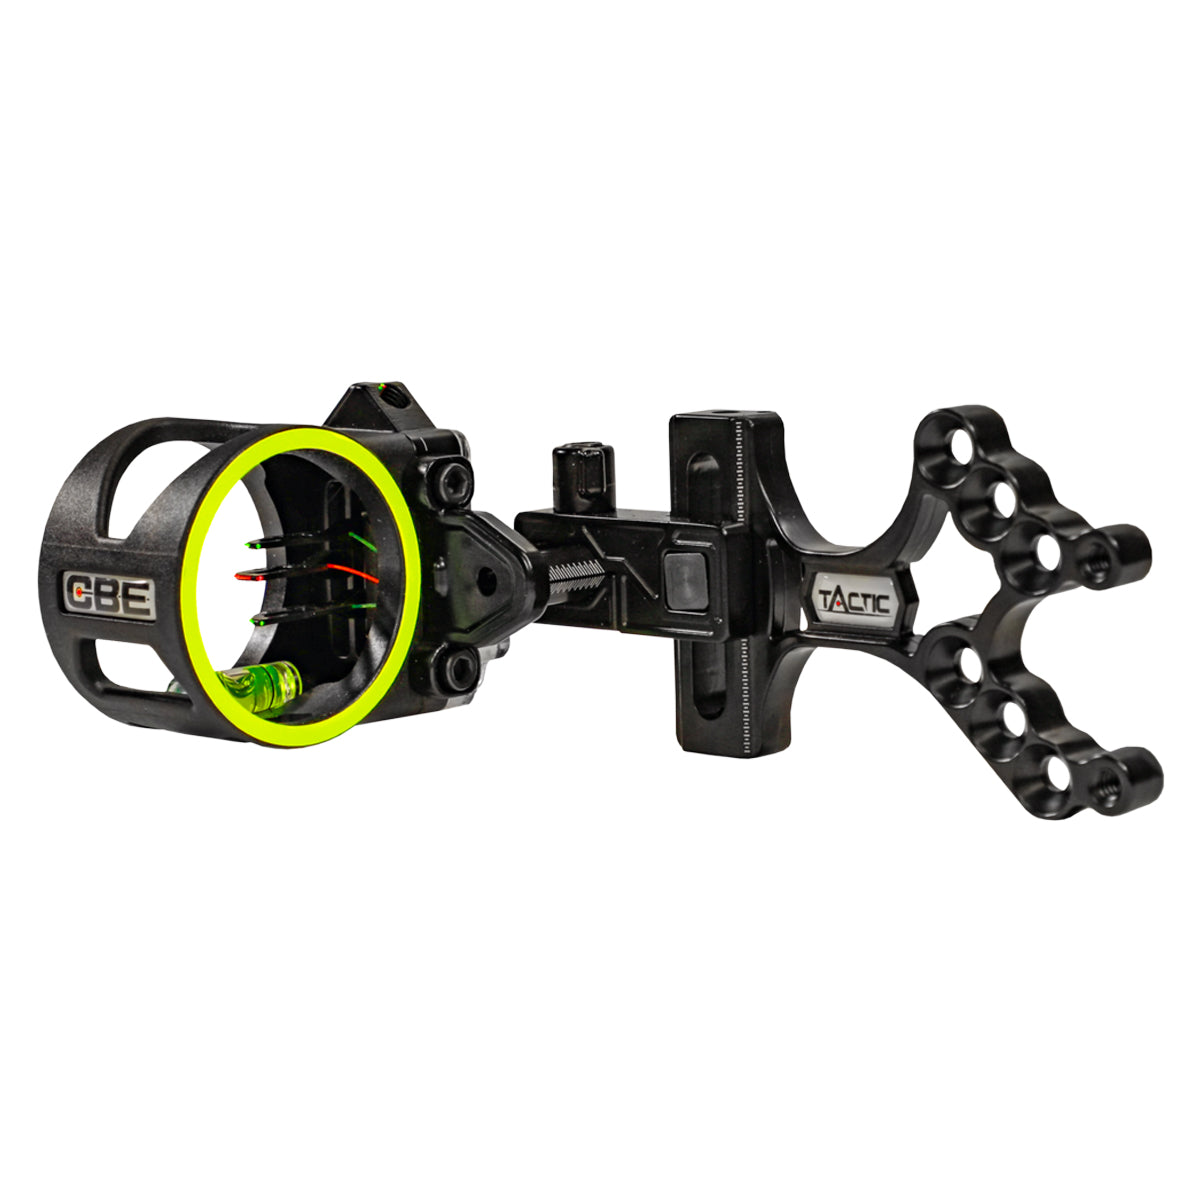 CBE Tactic 3 Pin Bow Sight in CBE Tactic 3 Pin Bow Sight by CBE | Archery - goHUNT Shop by GOHUNT | CBE - GOHUNT Shop